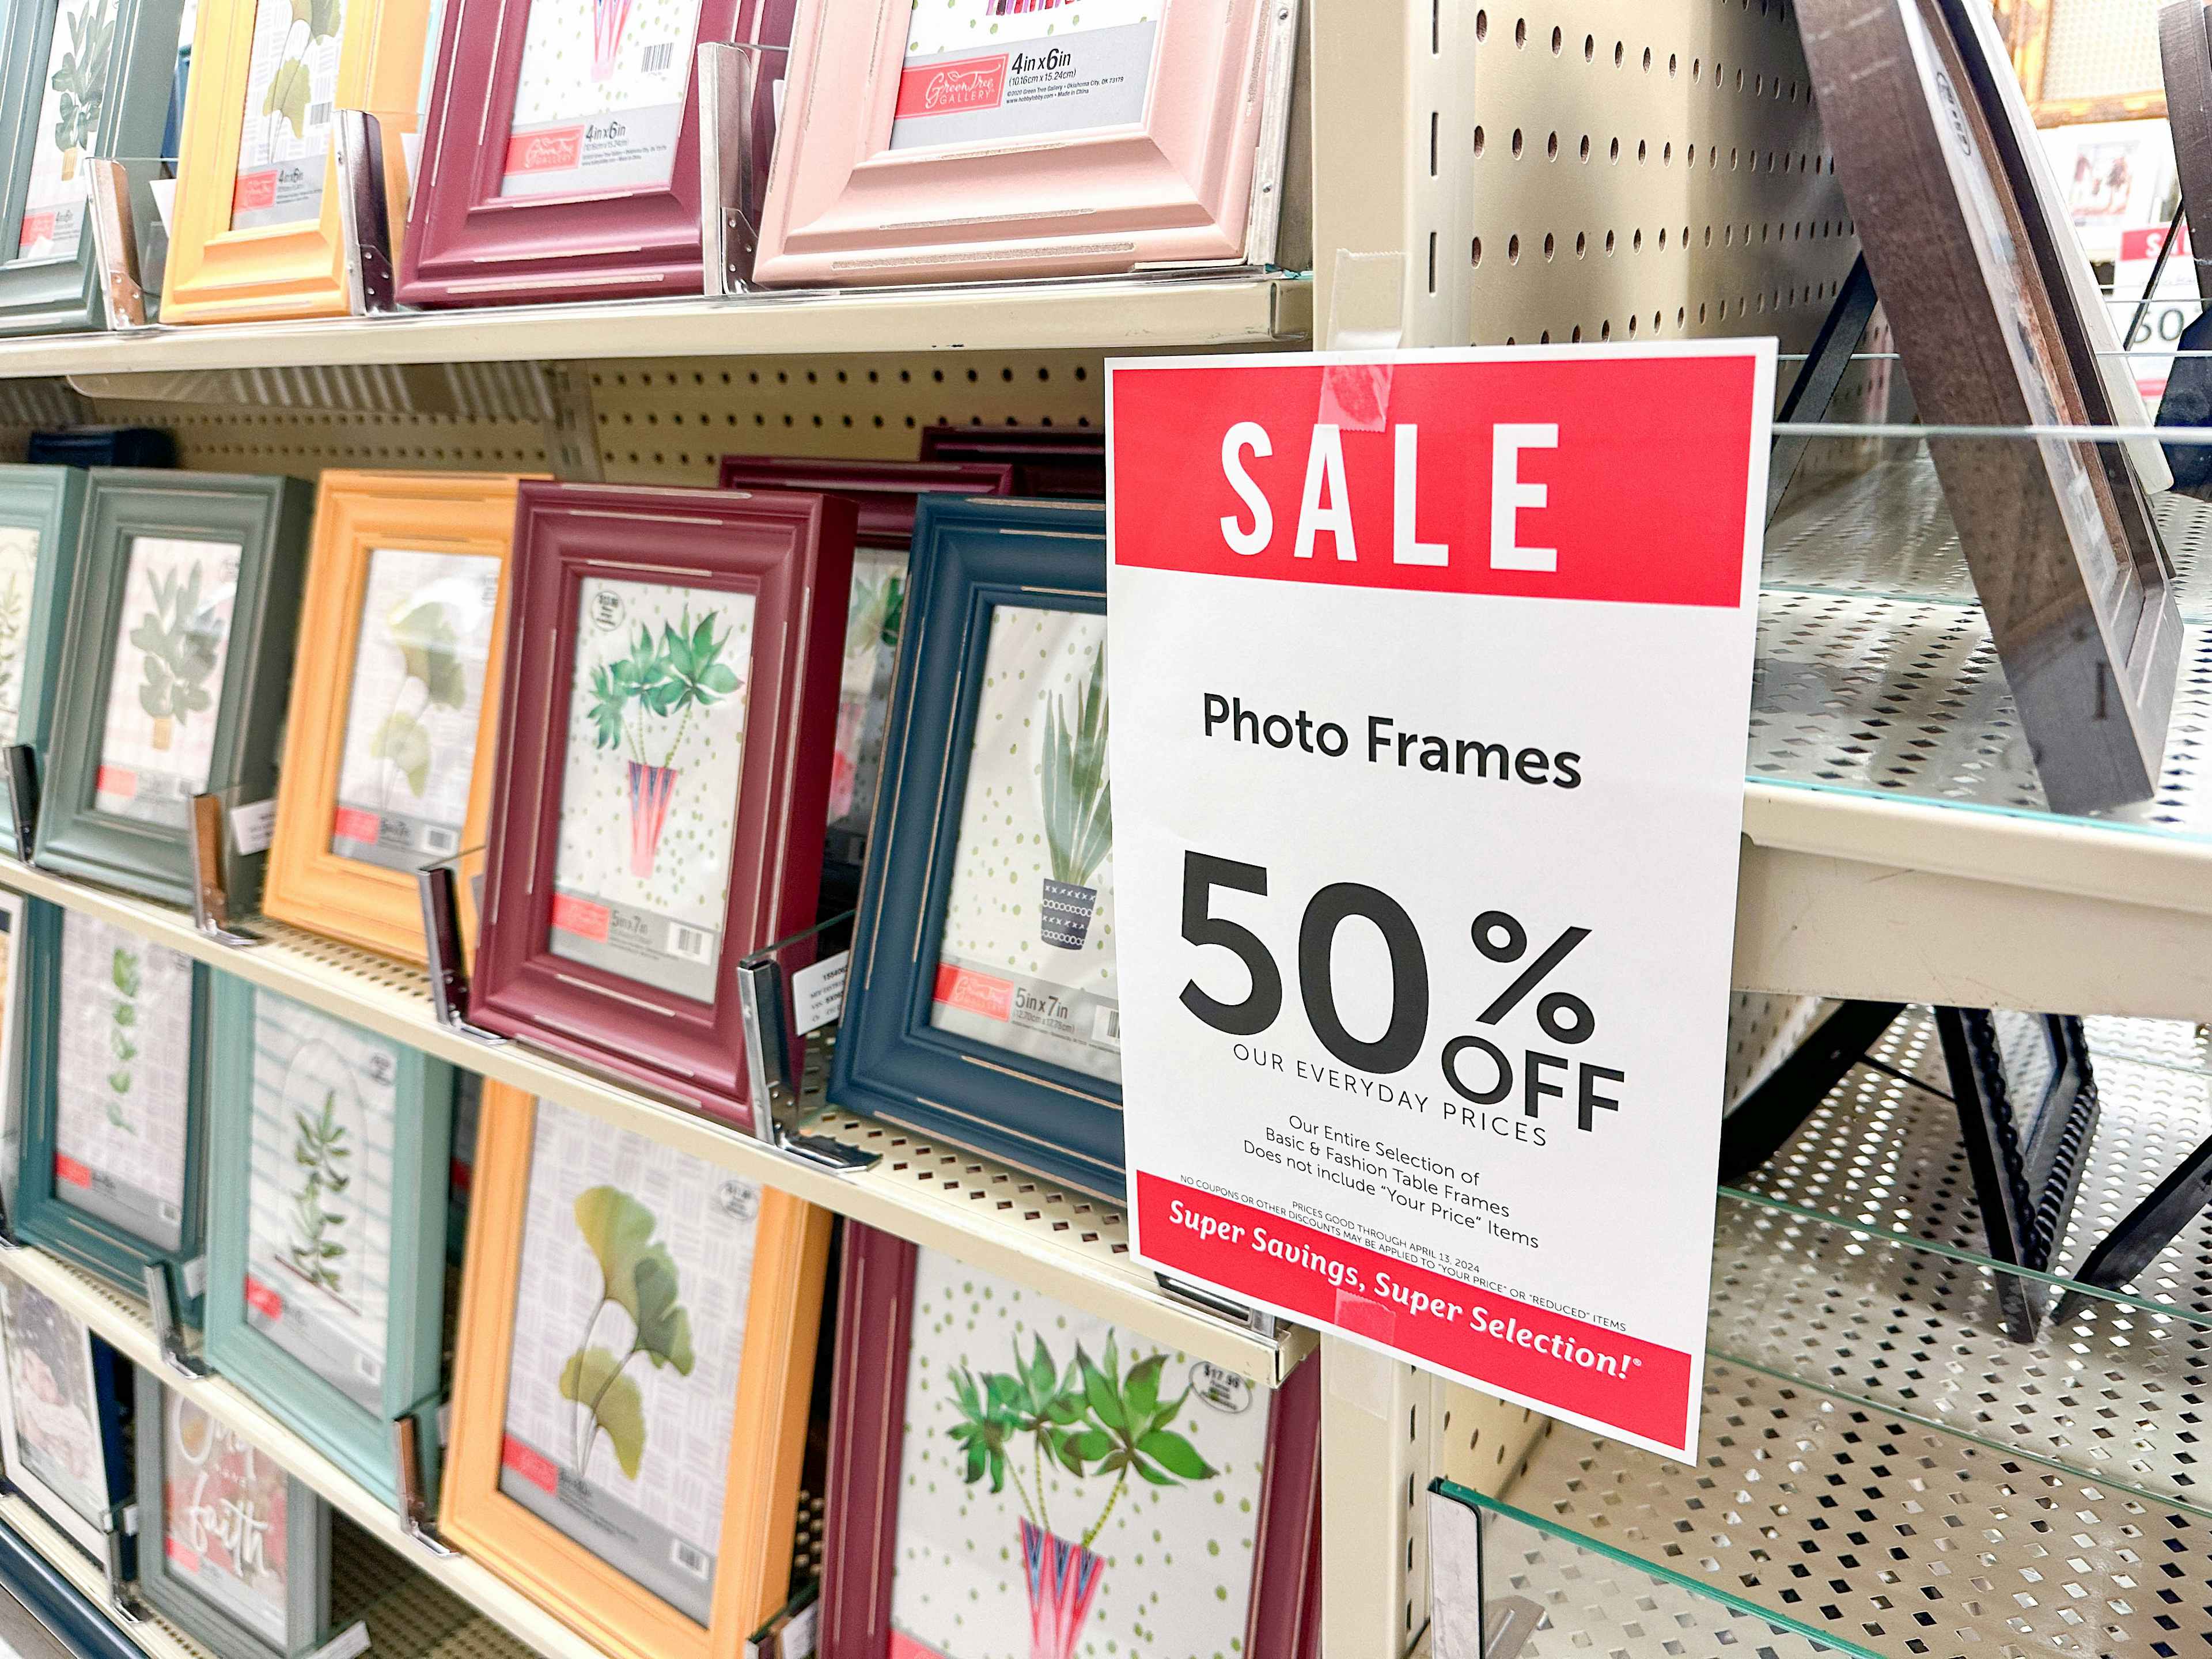 hobby-lobby-sales-deals-kcl-50-off-photo-frames